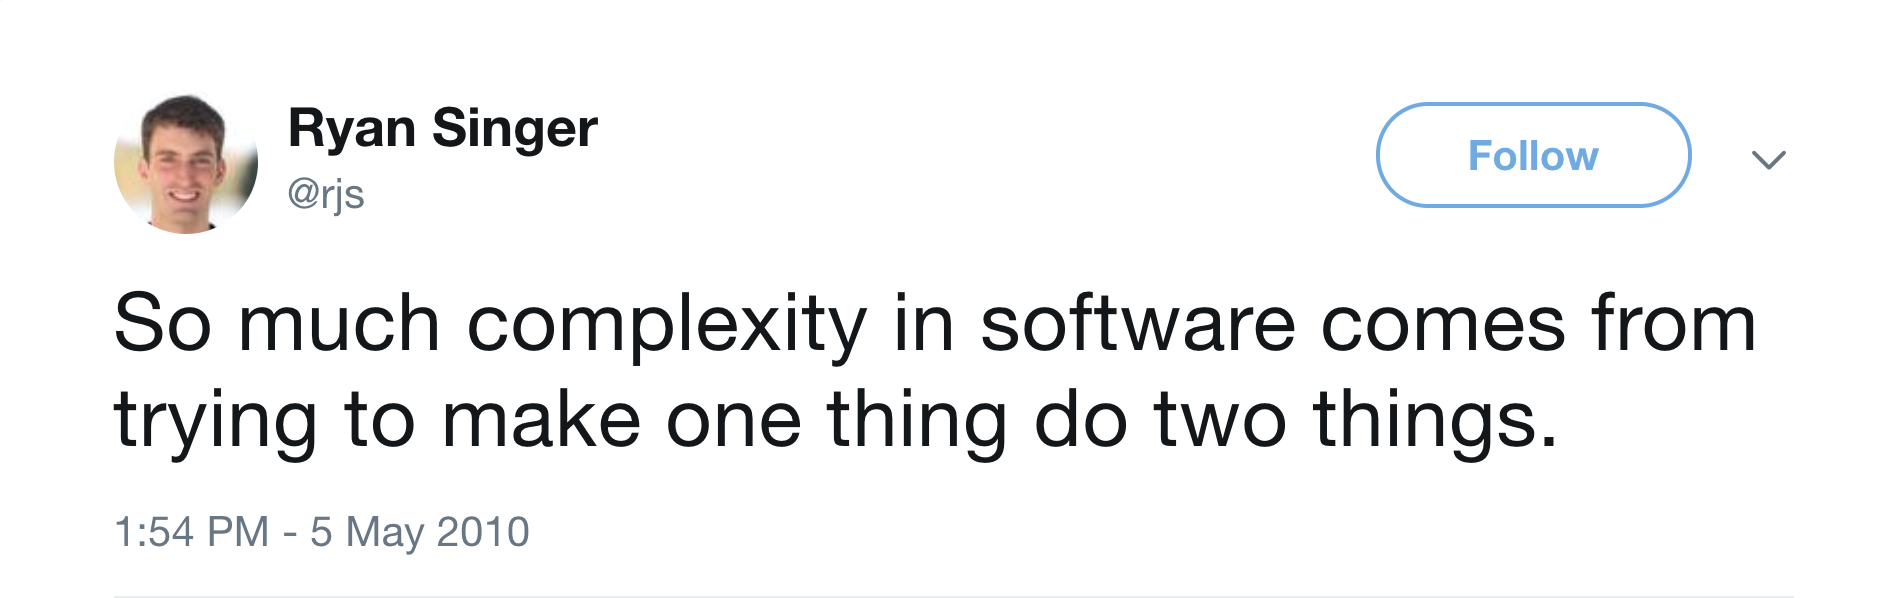 So much complexity in software comes from trying to make one thing do two things